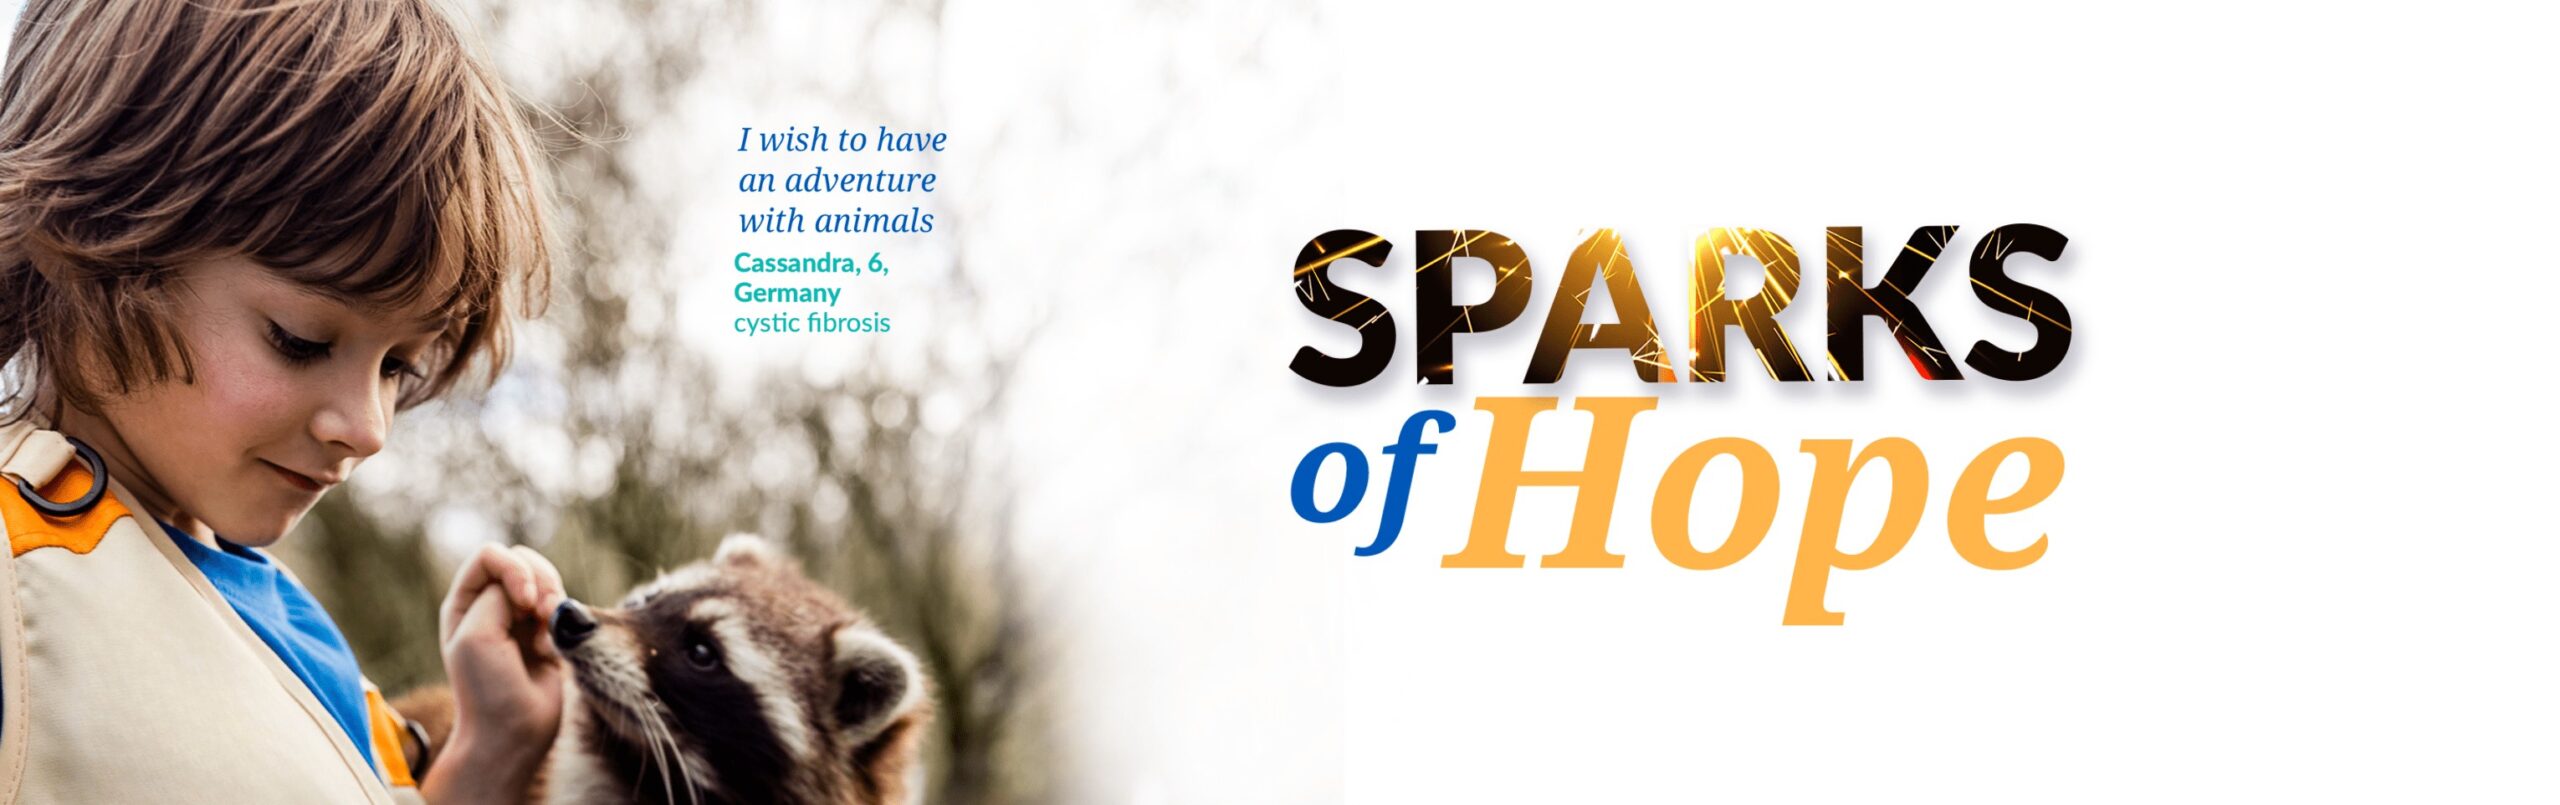 a banner entitled "Sparks of Hope" with a call-to-action to donate